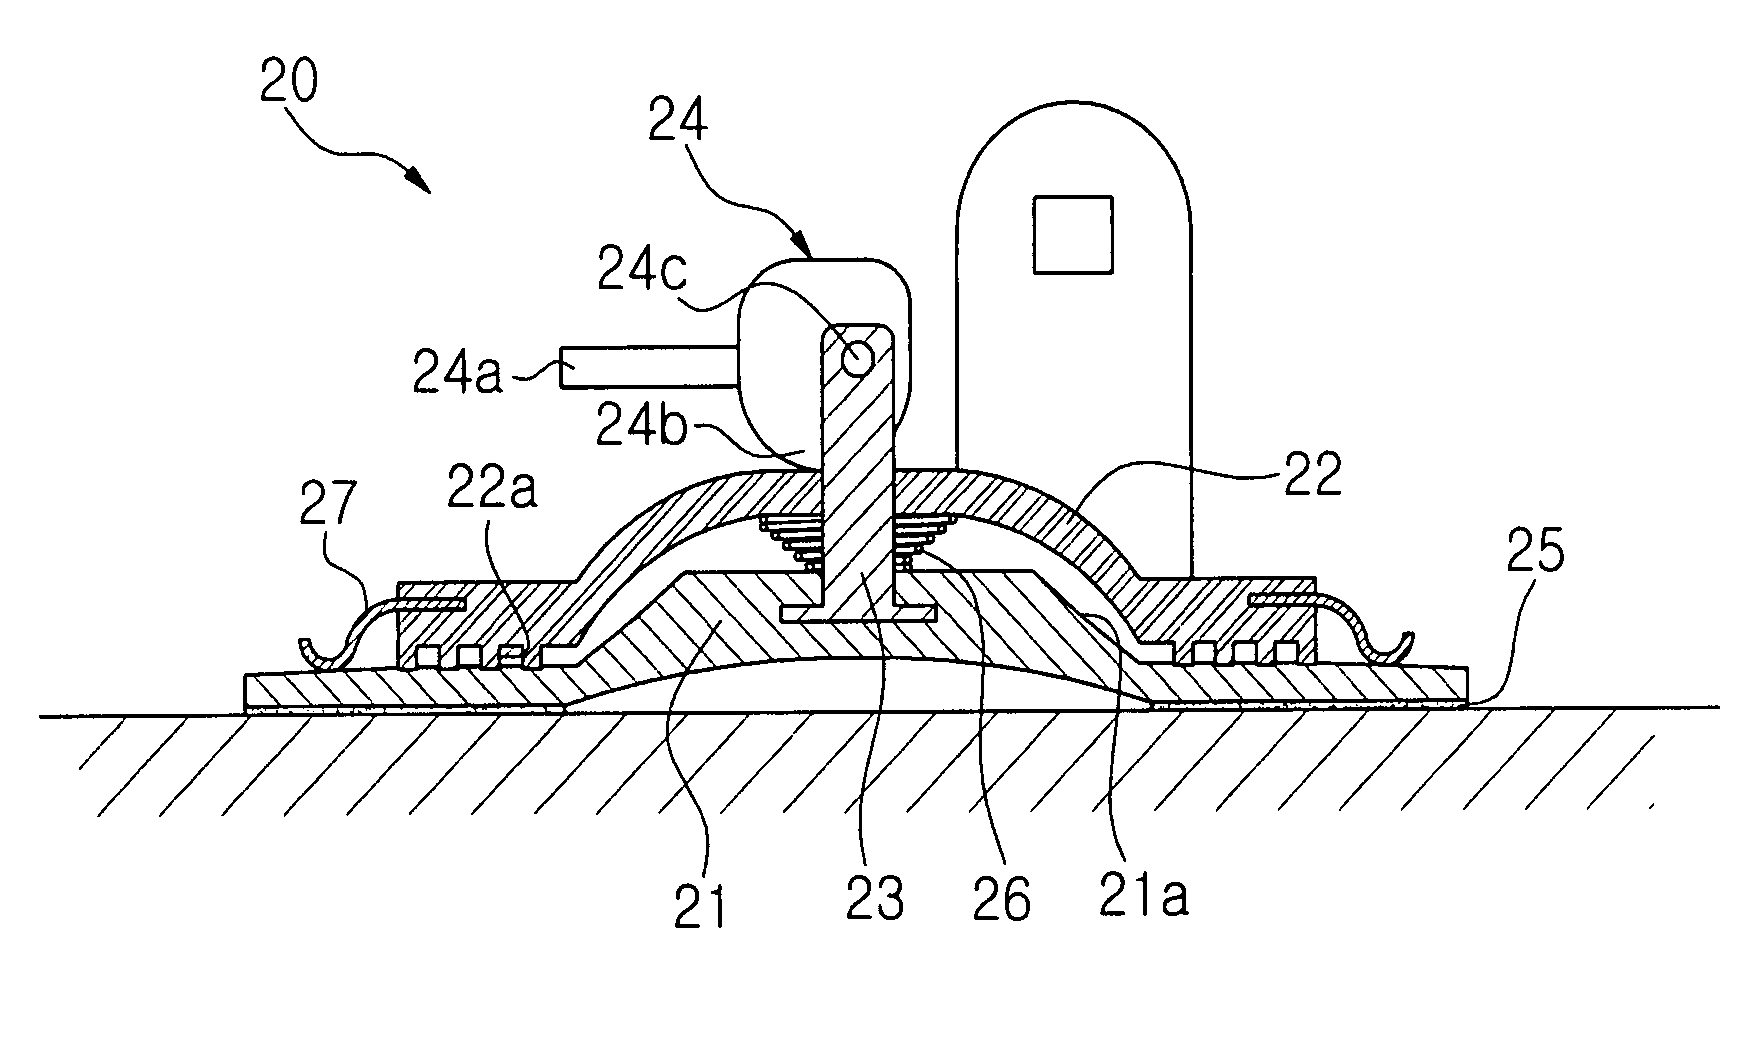 Adhesion device by holding low pressure